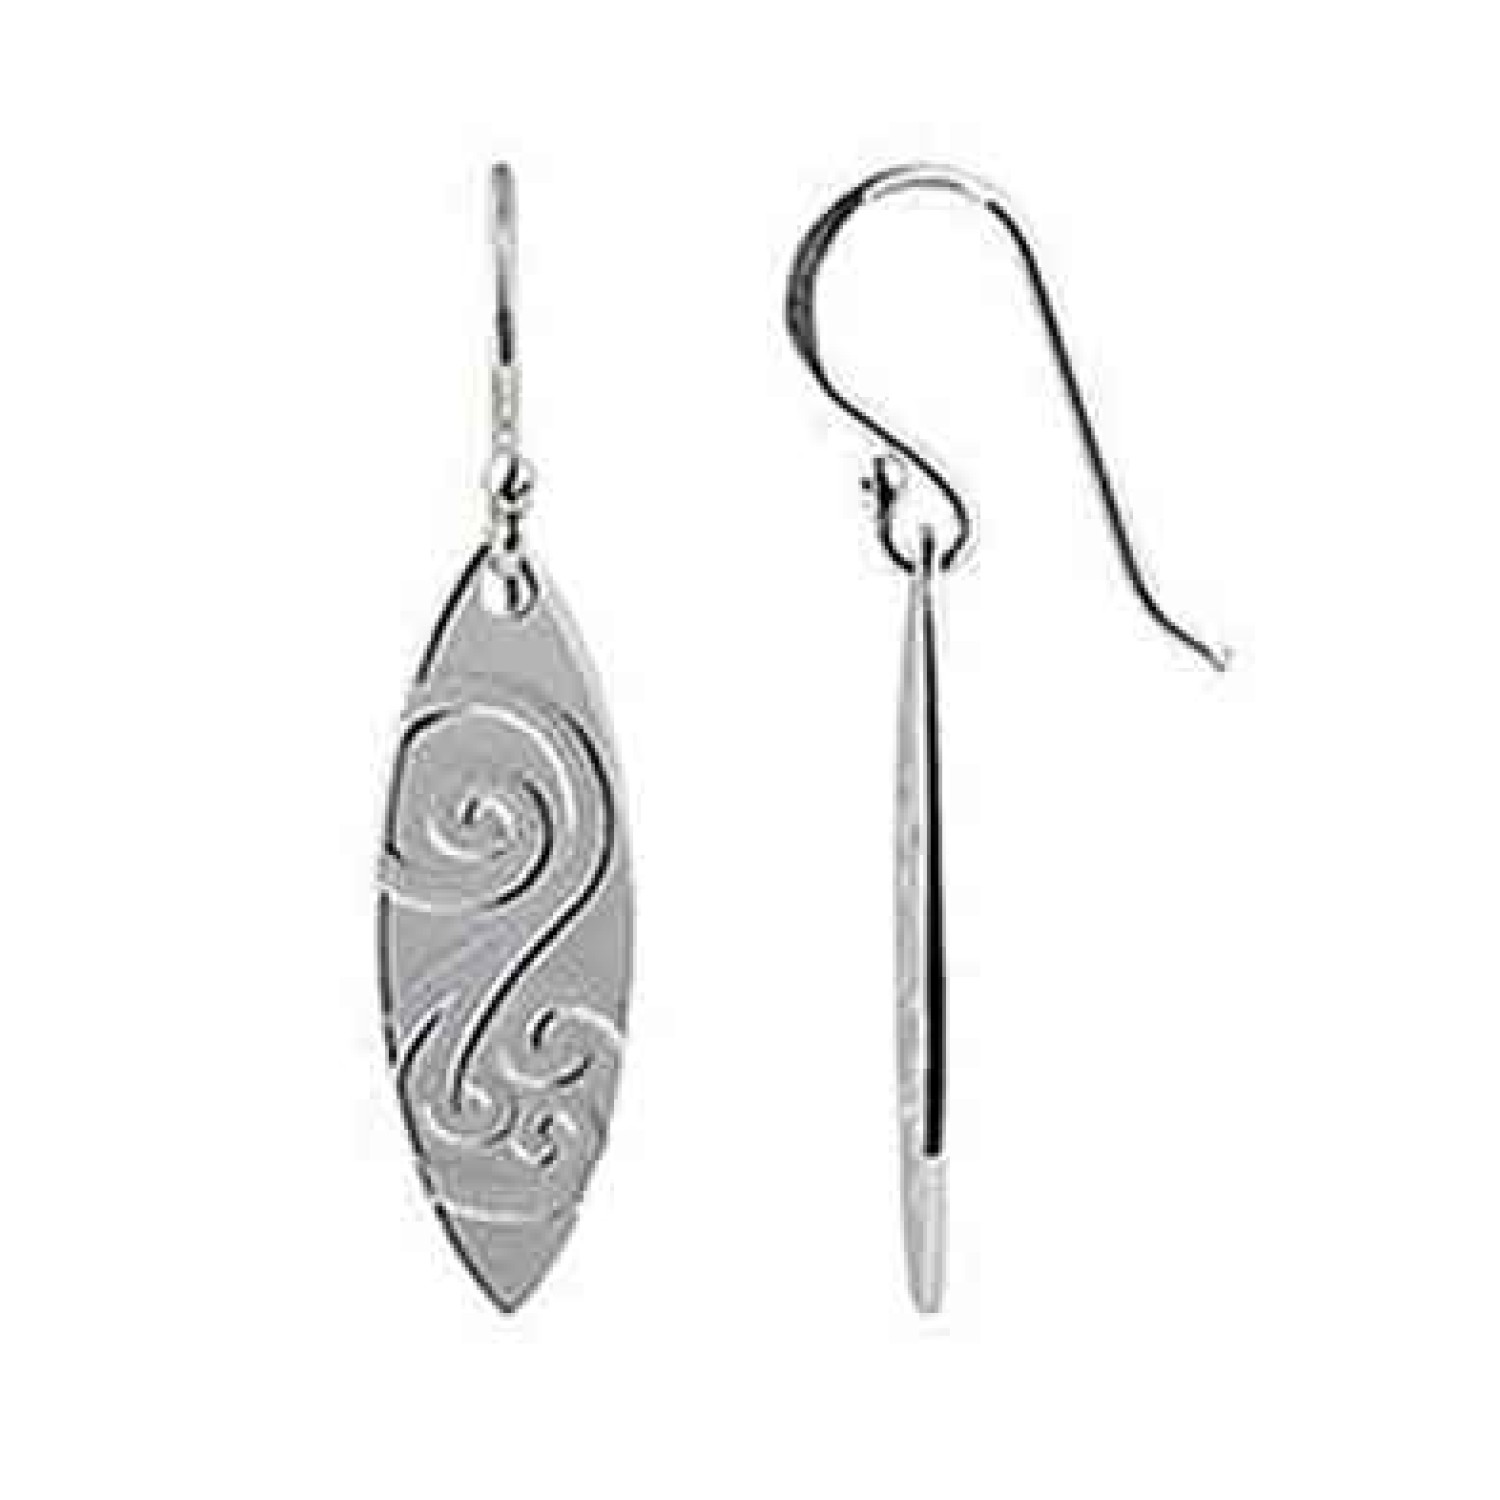 3E31028 Evolve Ocean Spirit Drop Earrings. The beautifully distinctive swirl in the shape of a koru symbolises our wild and spirited South Pacific Ocean which envelopes our tiny islands and energises our soul. Kaimoana (seafood) gathered from this powerfu